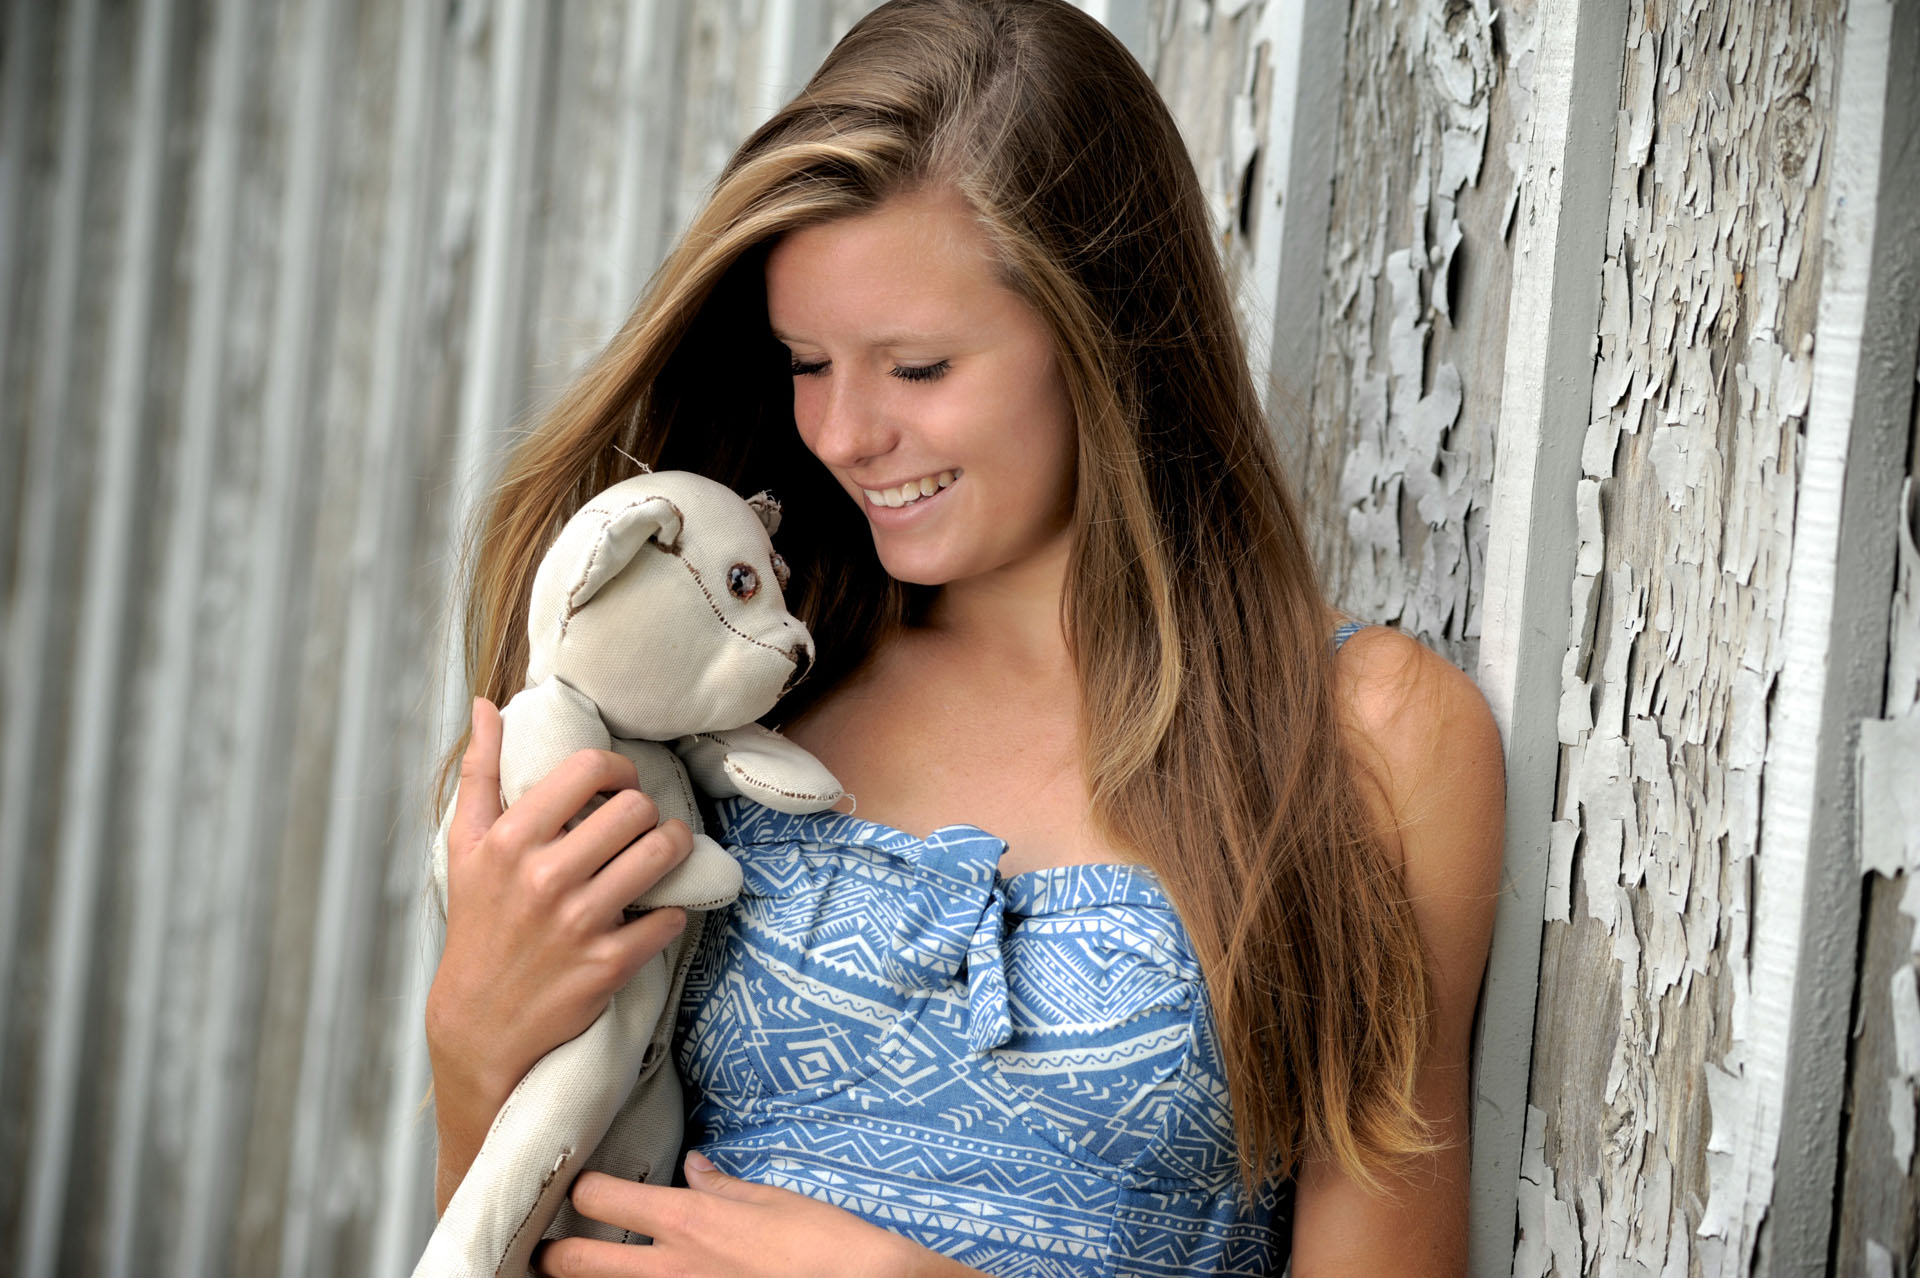 Troy , Michigan senior photographer's photo taken as the high school senior plays with her old stuffed animal for her their senior pictures in Troy, Michigan.